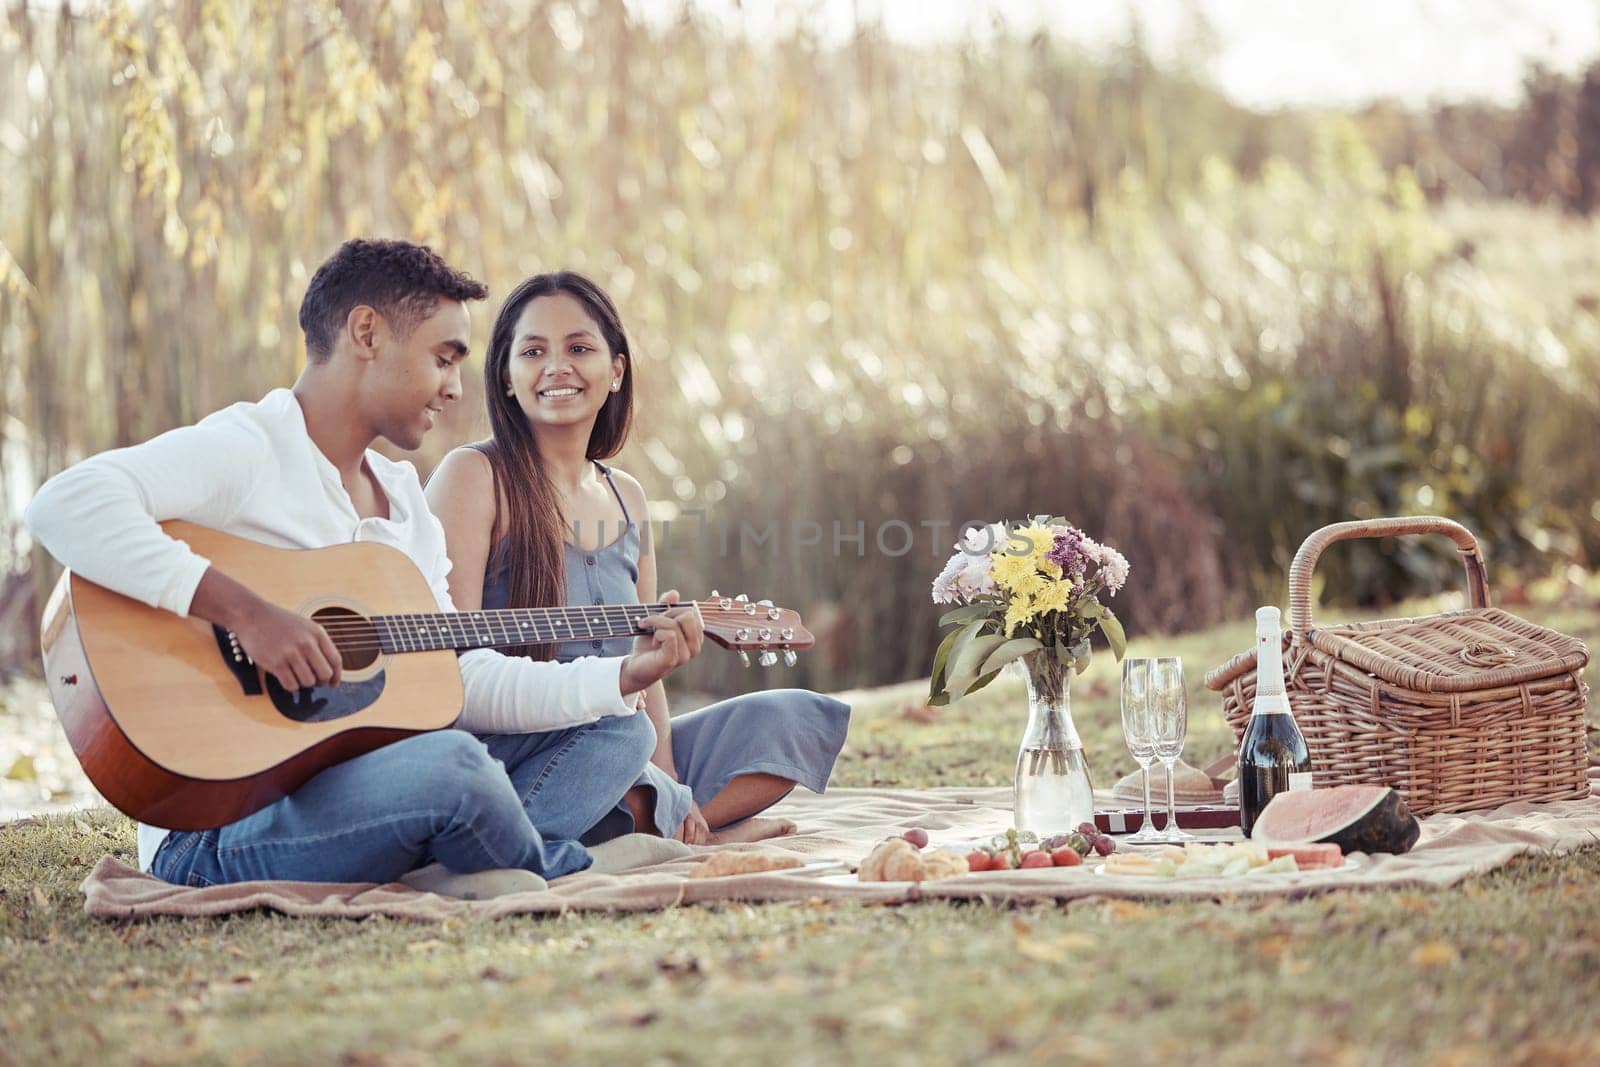 Man, woman and date with picnic, guitar and romance for love or relationship anniversary. Couple, nature and lake with music, happiness and summer passion with bouquet for valentines celebration.